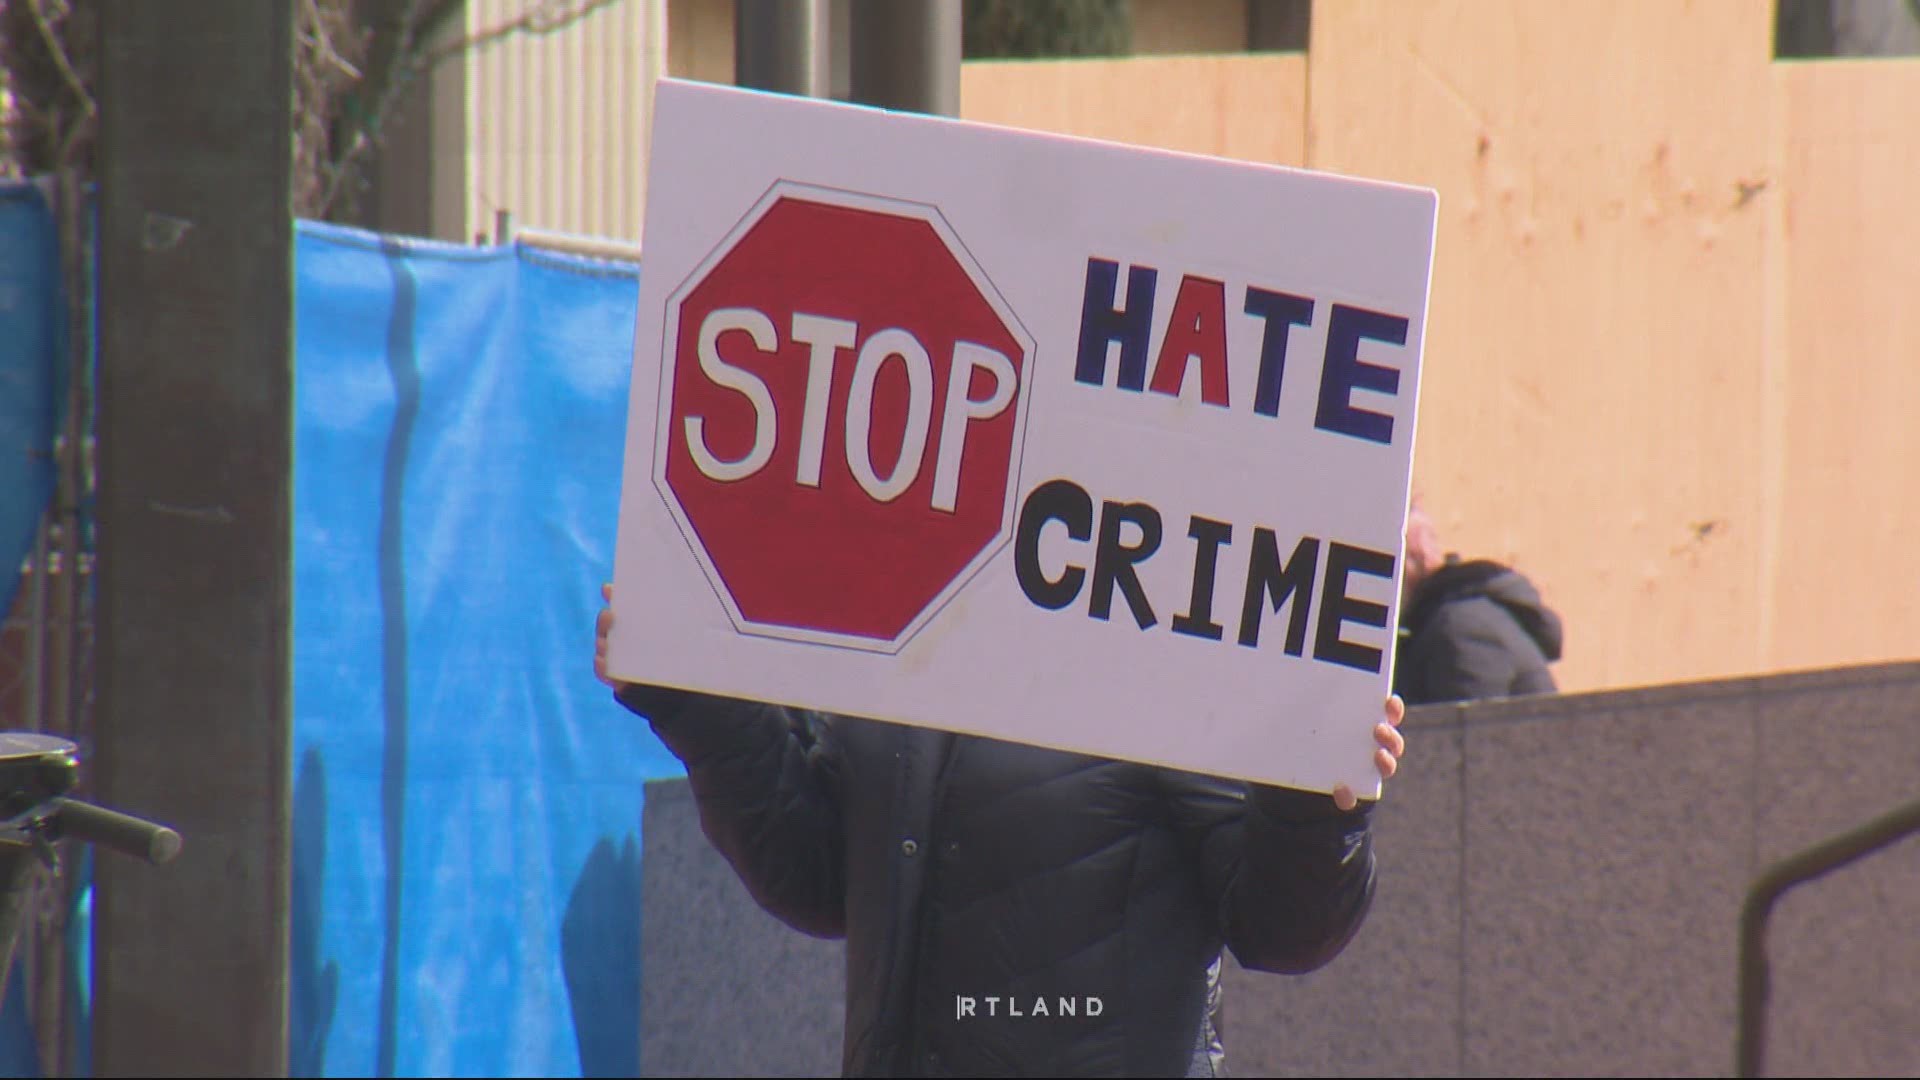 There were two Stop Asian Hate rallies in Portland on Sunday bringing young and old together to support the Asian communities in our backyard.